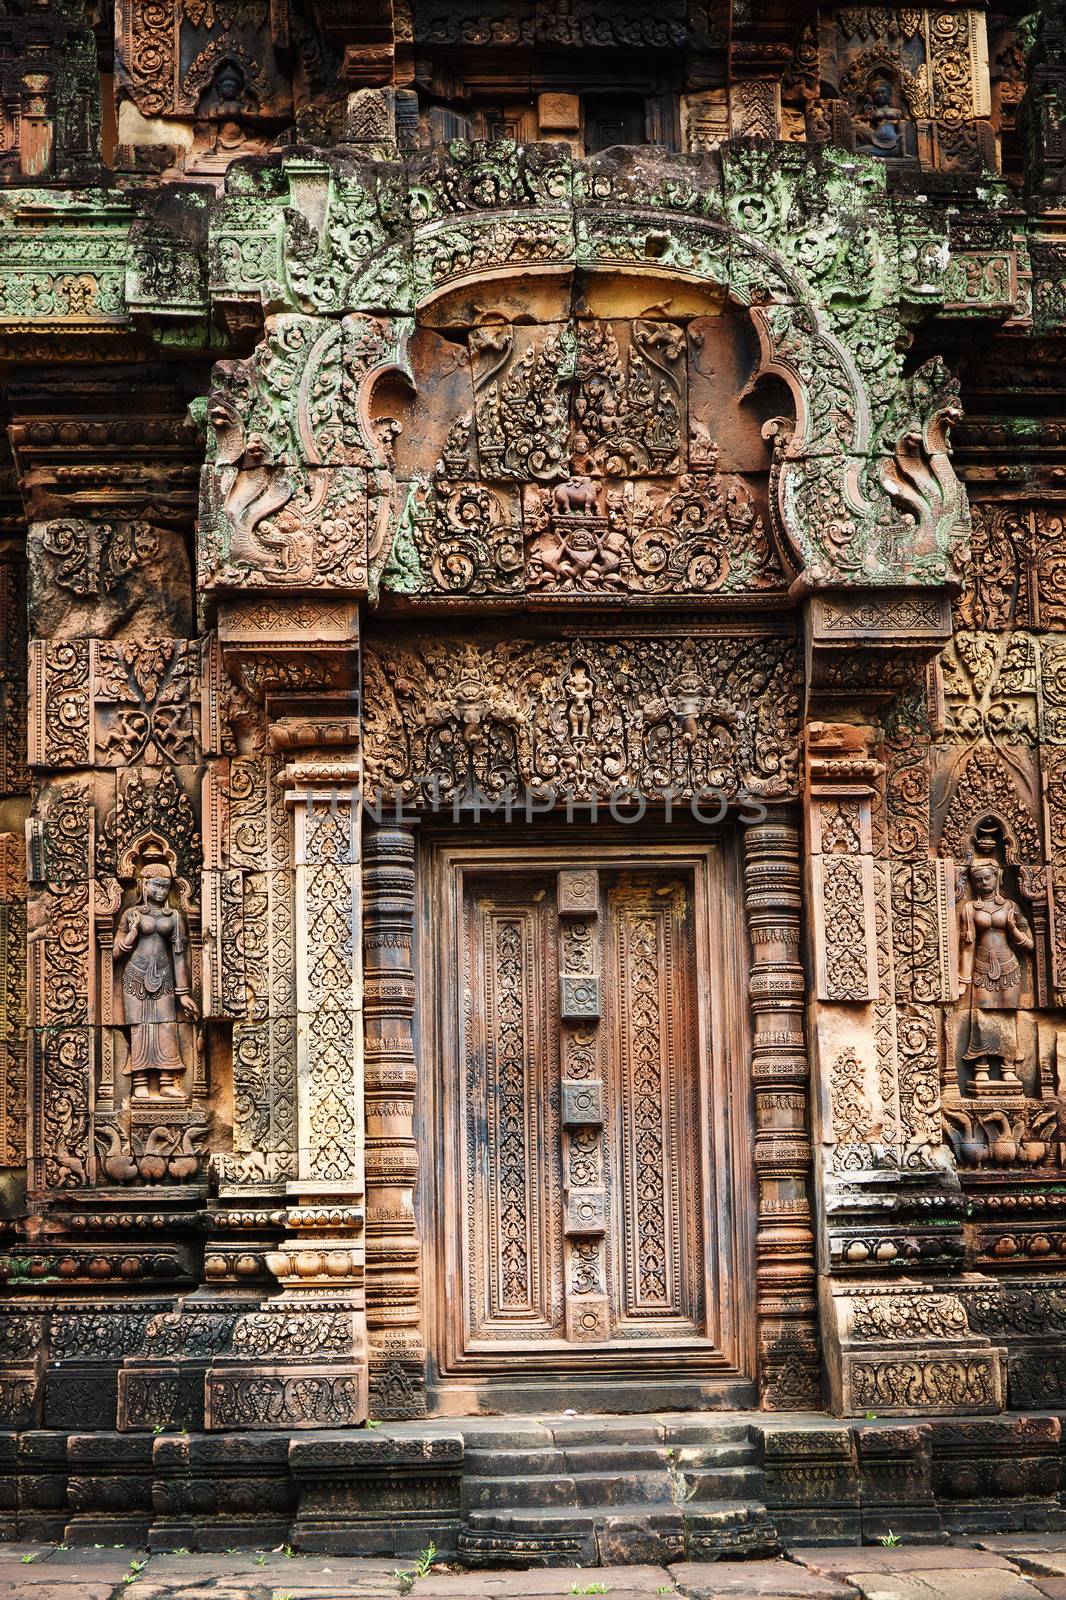 The most picturesque castle of Angkor Thom in Cambodia. Banteay Srei castle.